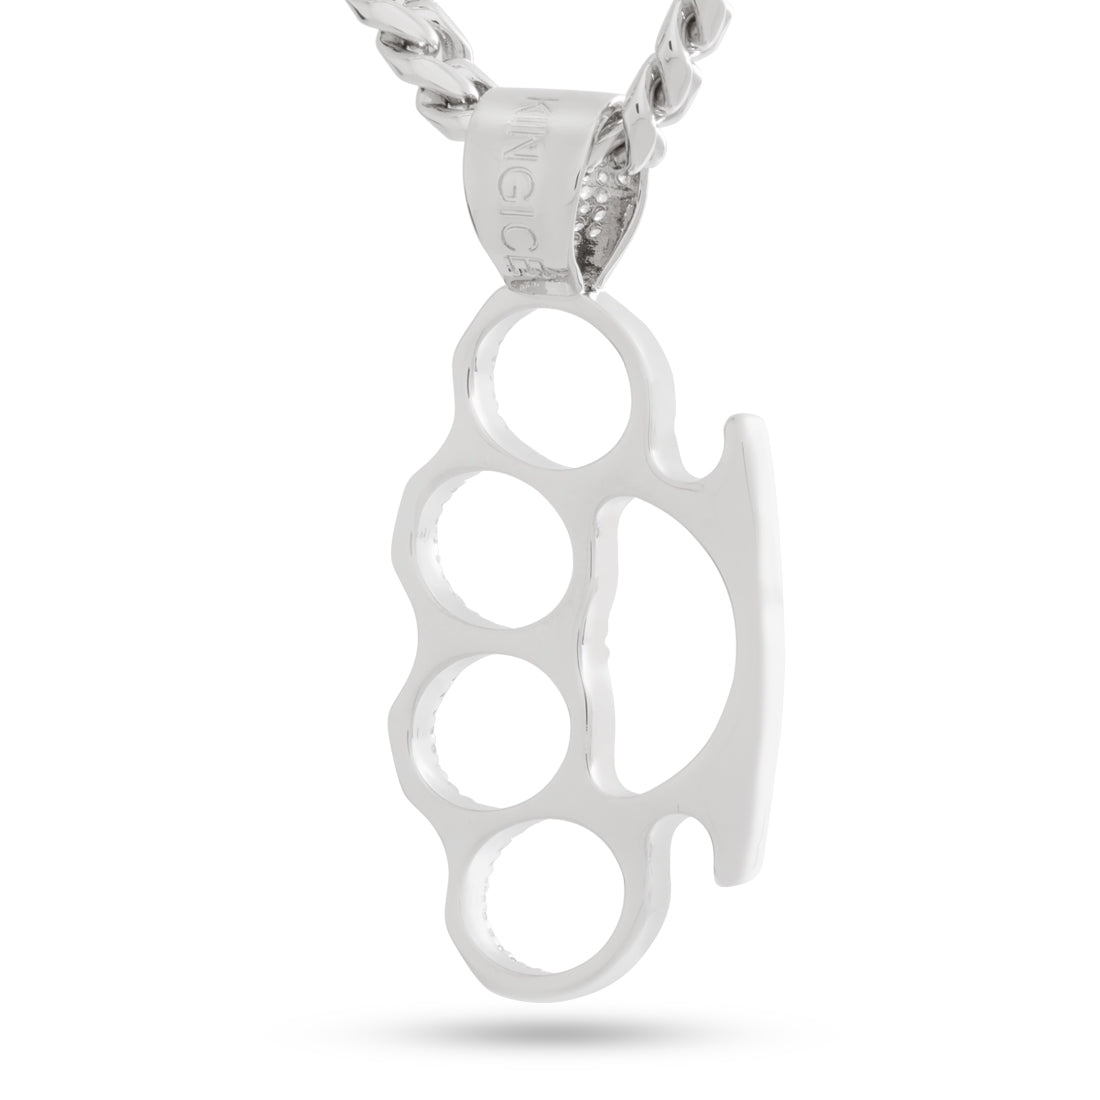 Stylish Edgy Silver Brass Knuckles Pendant with Sturdy Bismarck Chain –  Pavlove Jewelry